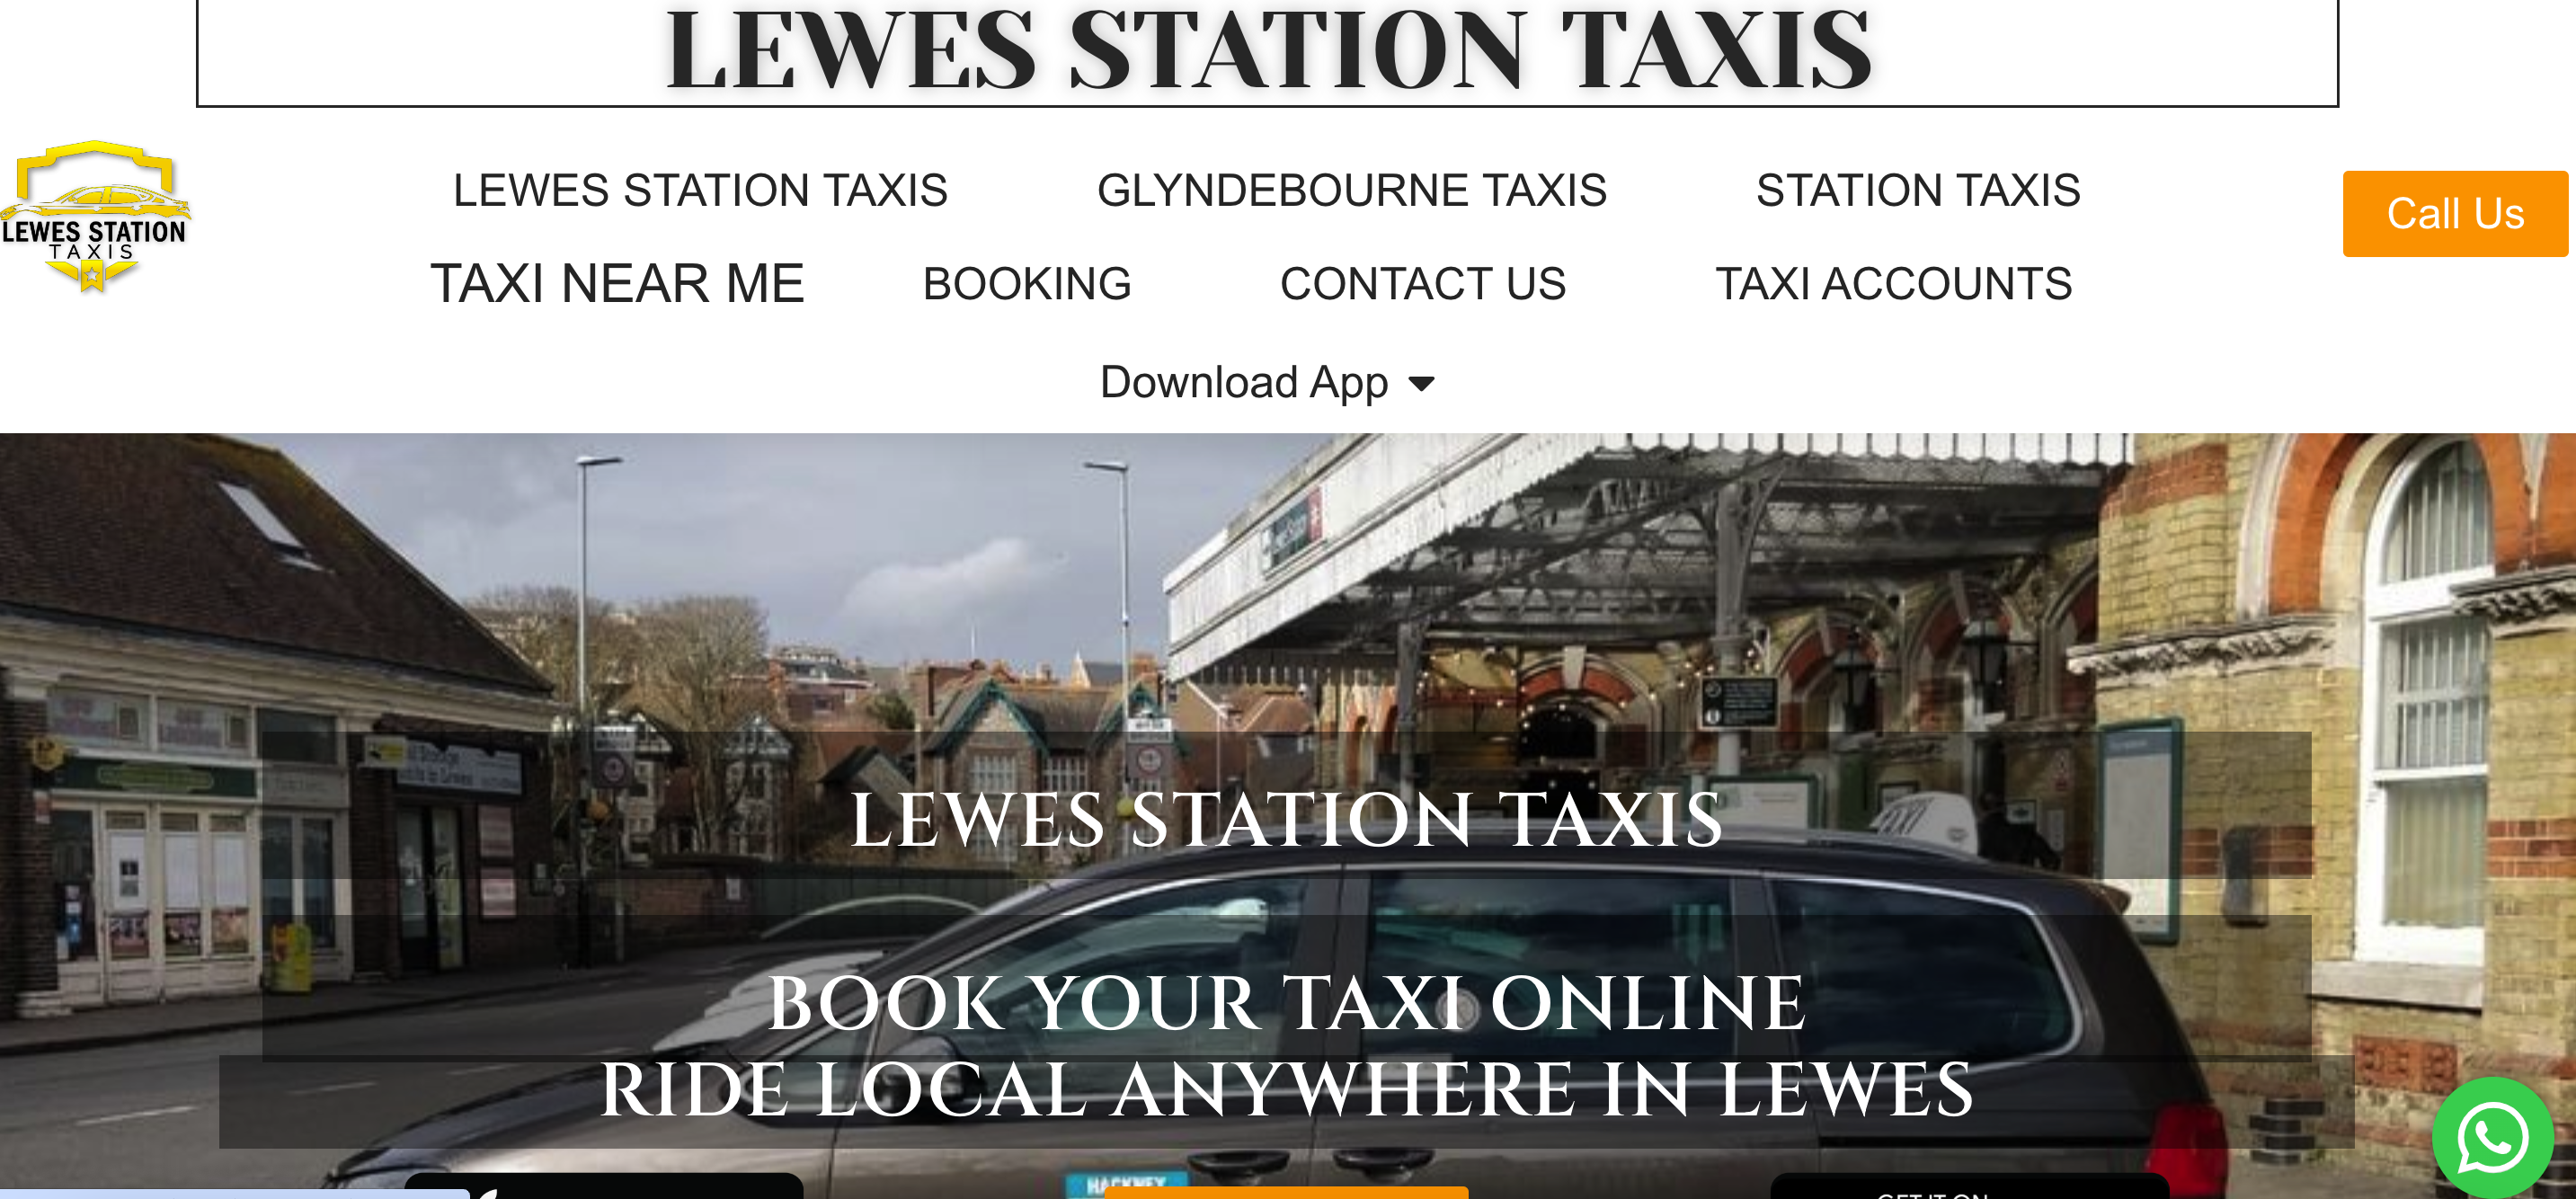 Lewes Station Taxis